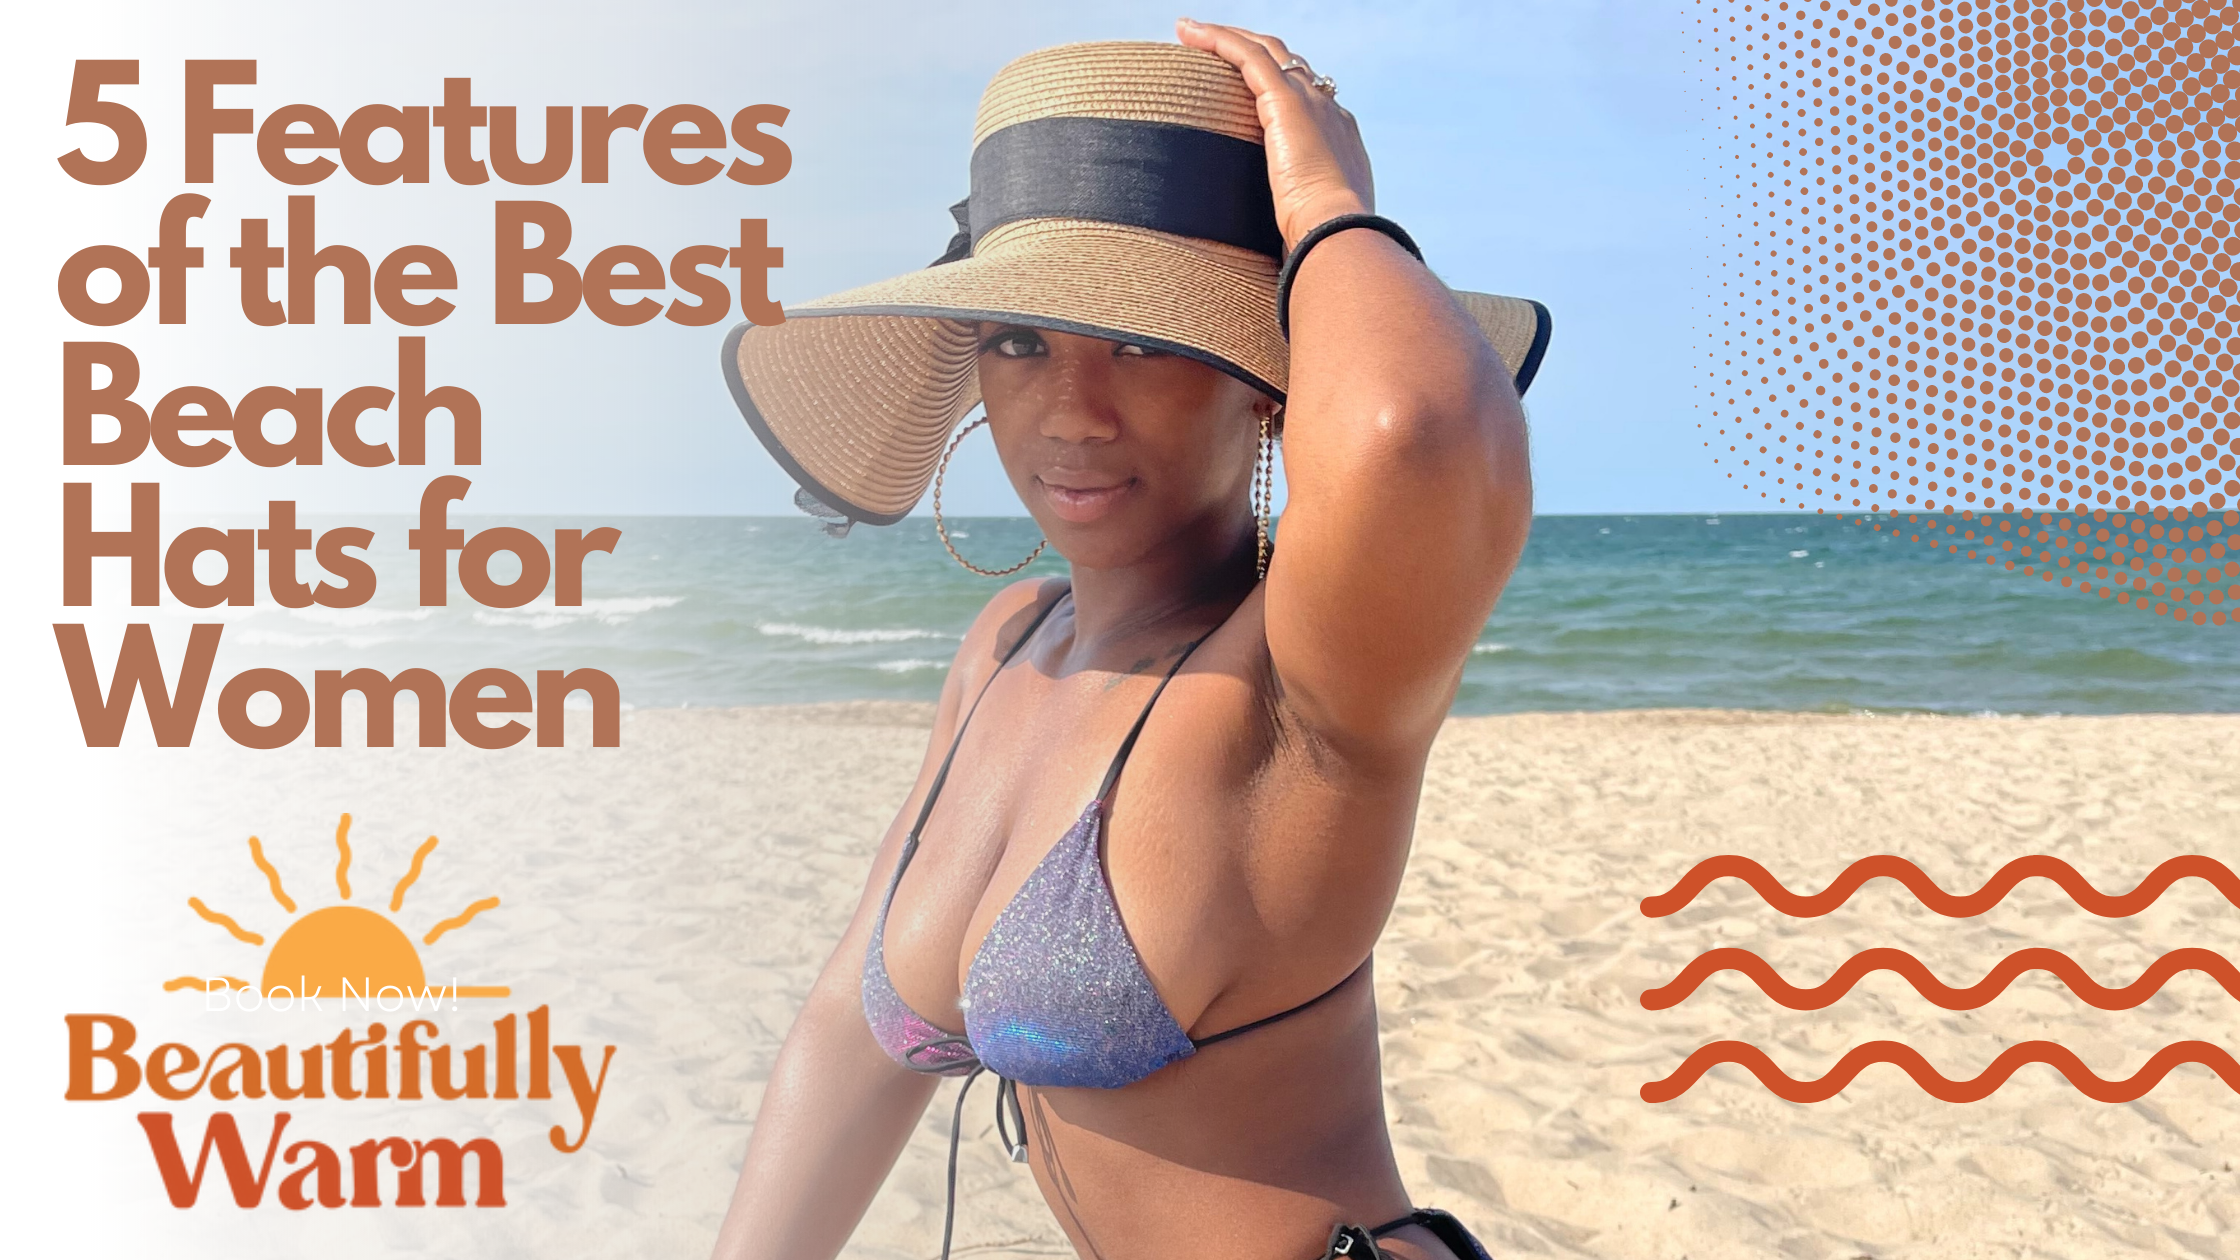 5 Features of the Best Beach Hats for Women – Beautifully Warm, LLC